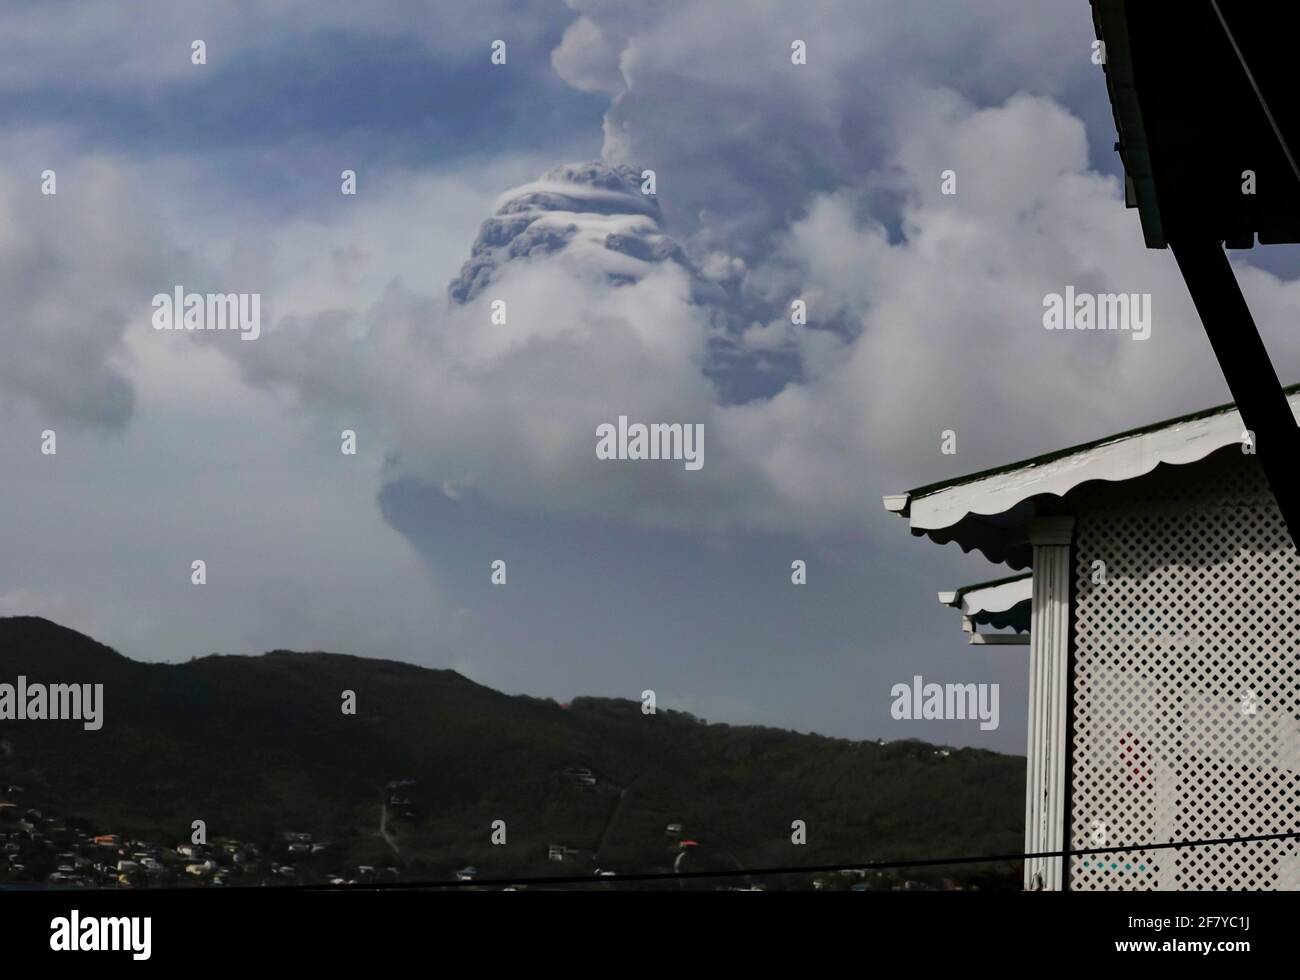 Ash plume from the second explosive eruption of La Soufrière volcano on St Vincent, April 9th 2021, seen from nearby Bequia island - looking like rock Stock Photo